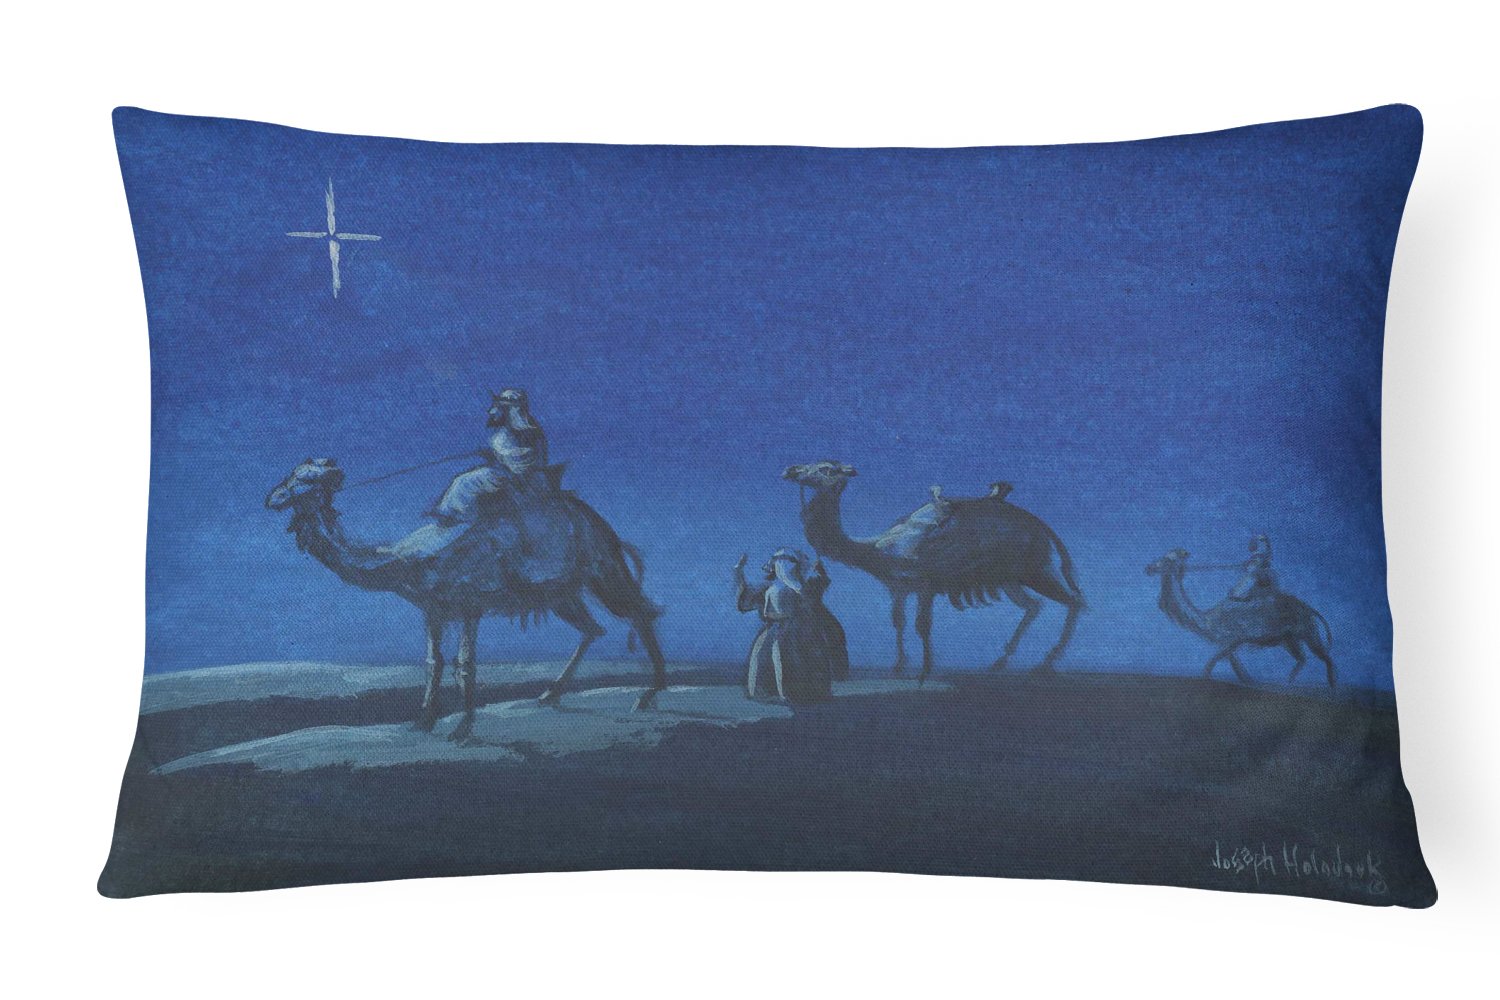 Wise Men in Blue Canvas Fabric Decorative Pillow PJH3001PW1216 by Caroline's Treasures